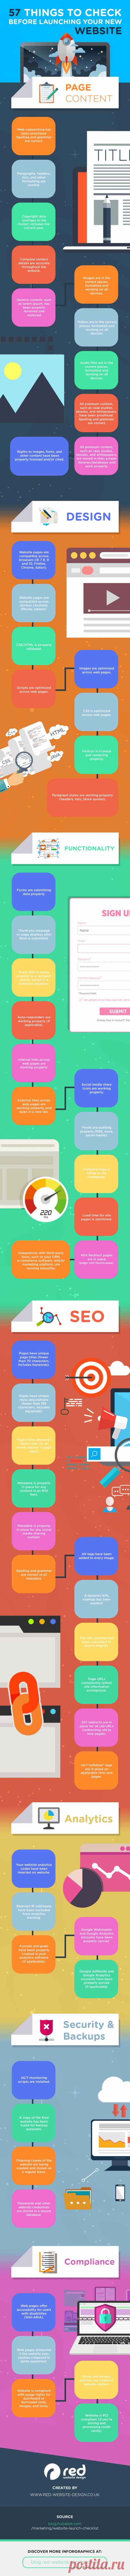 Page content
Design
Functionality
SEO
Analytics
Security and backups
Compliance
Web Design Checklist: 57 Things to Check Before Launching Your New Site